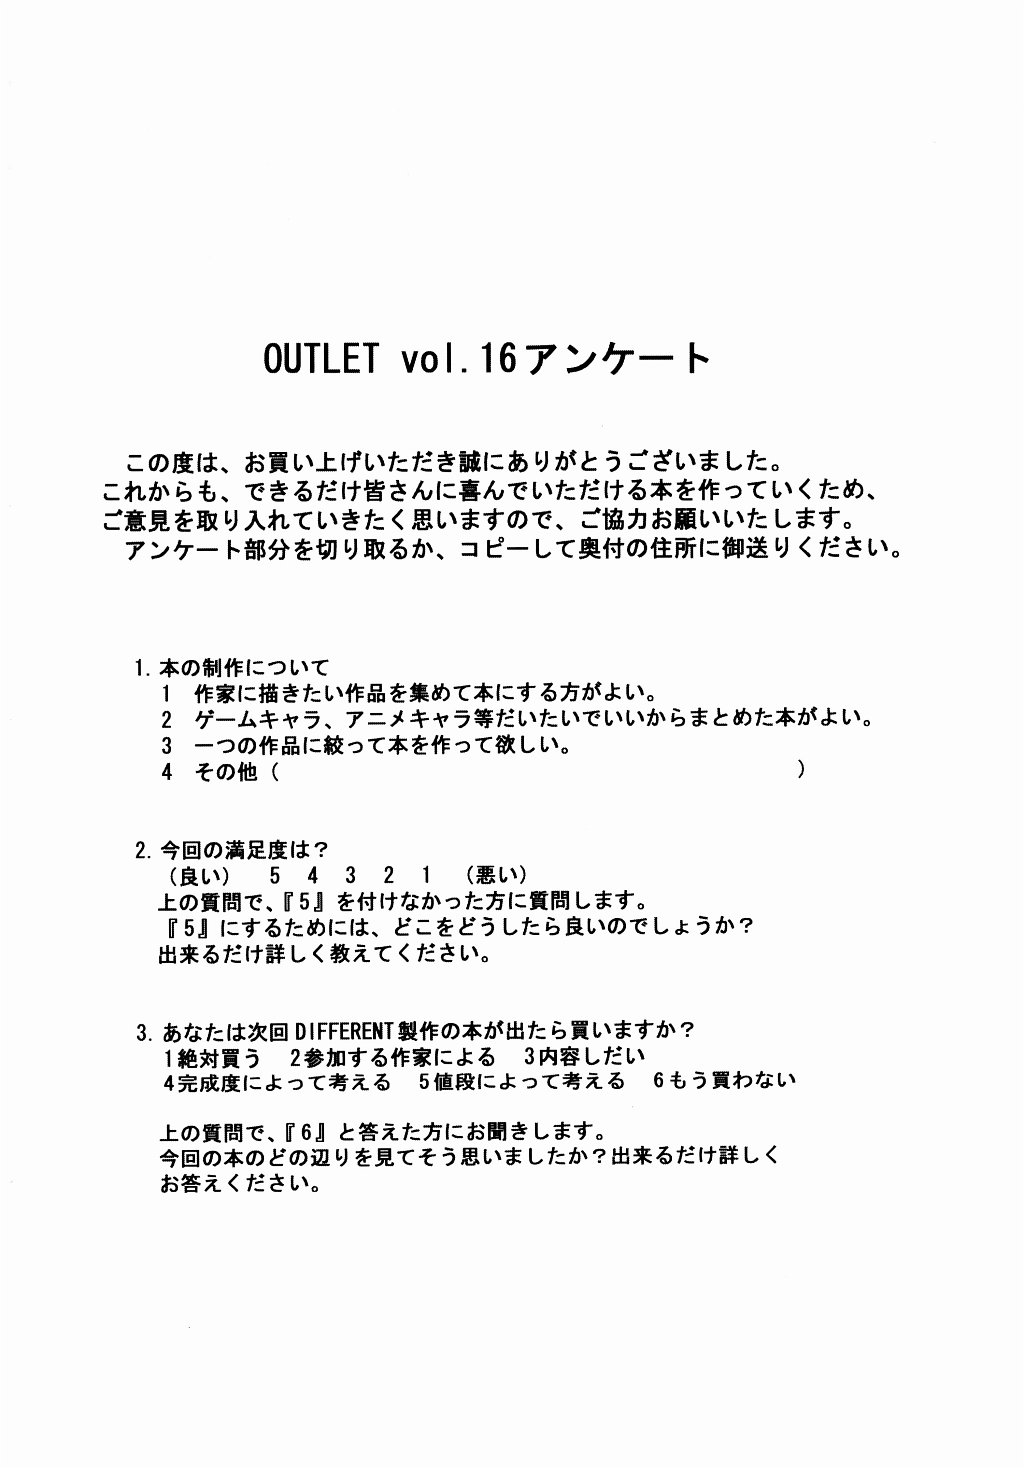 [ST DIFFERENT] Outlet 16 (Uchuu No Stellvia) [ST DIFFERENT] Outlet 16 (宇宙のステルヴィア)